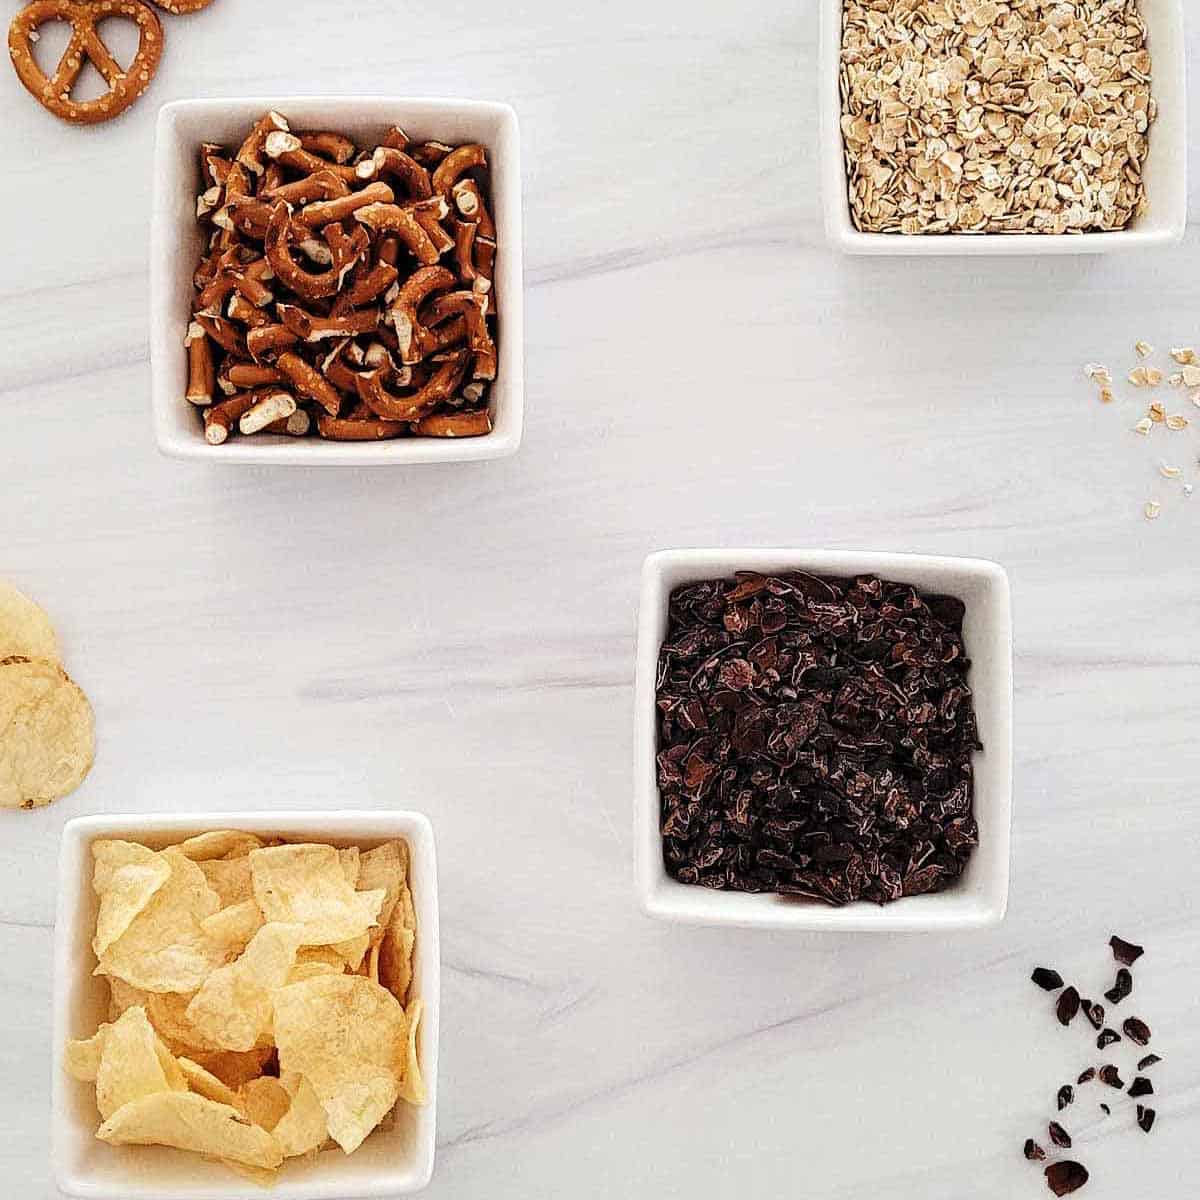 Bowls of savory cookie add-ins like pretzels, potato chips, quick oats, and cocoa nibs.